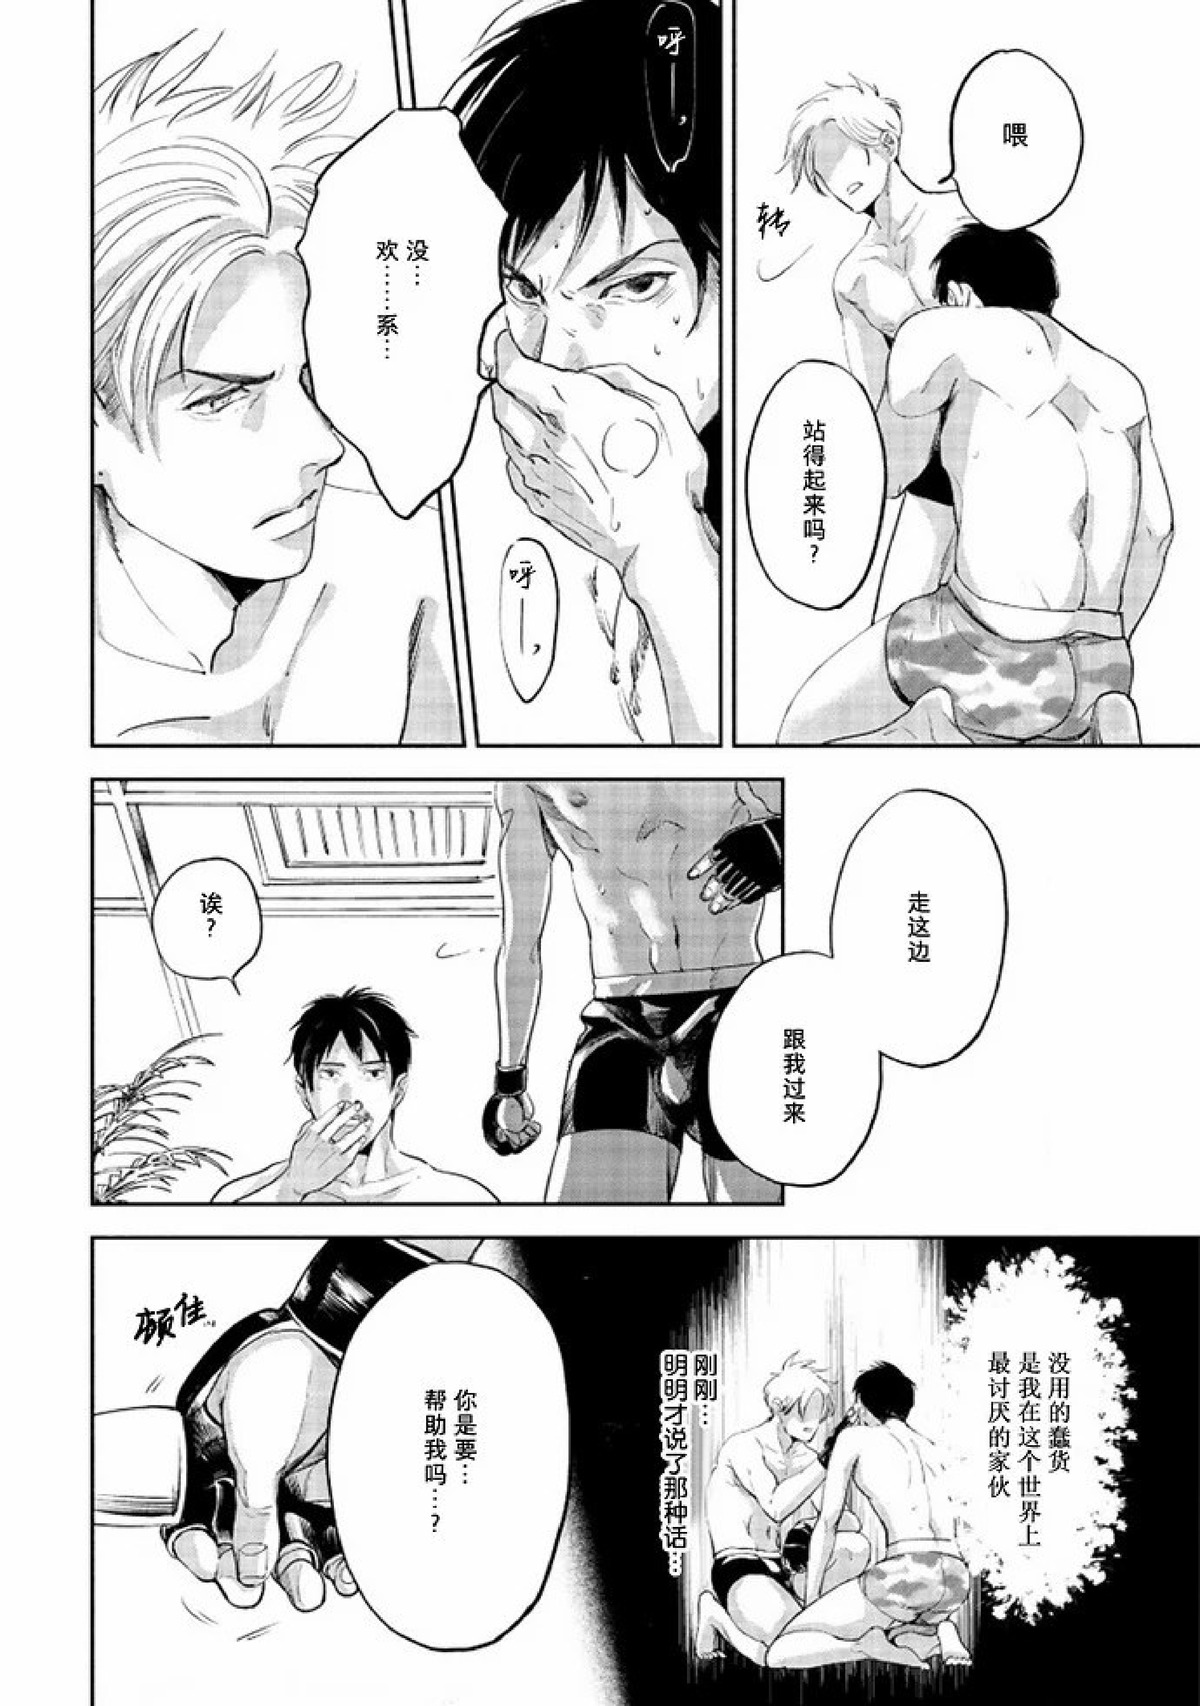 【Two sides of the same coin[腐漫]】漫画-（上卷01-02）章节漫画下拉式图片-72.jpg